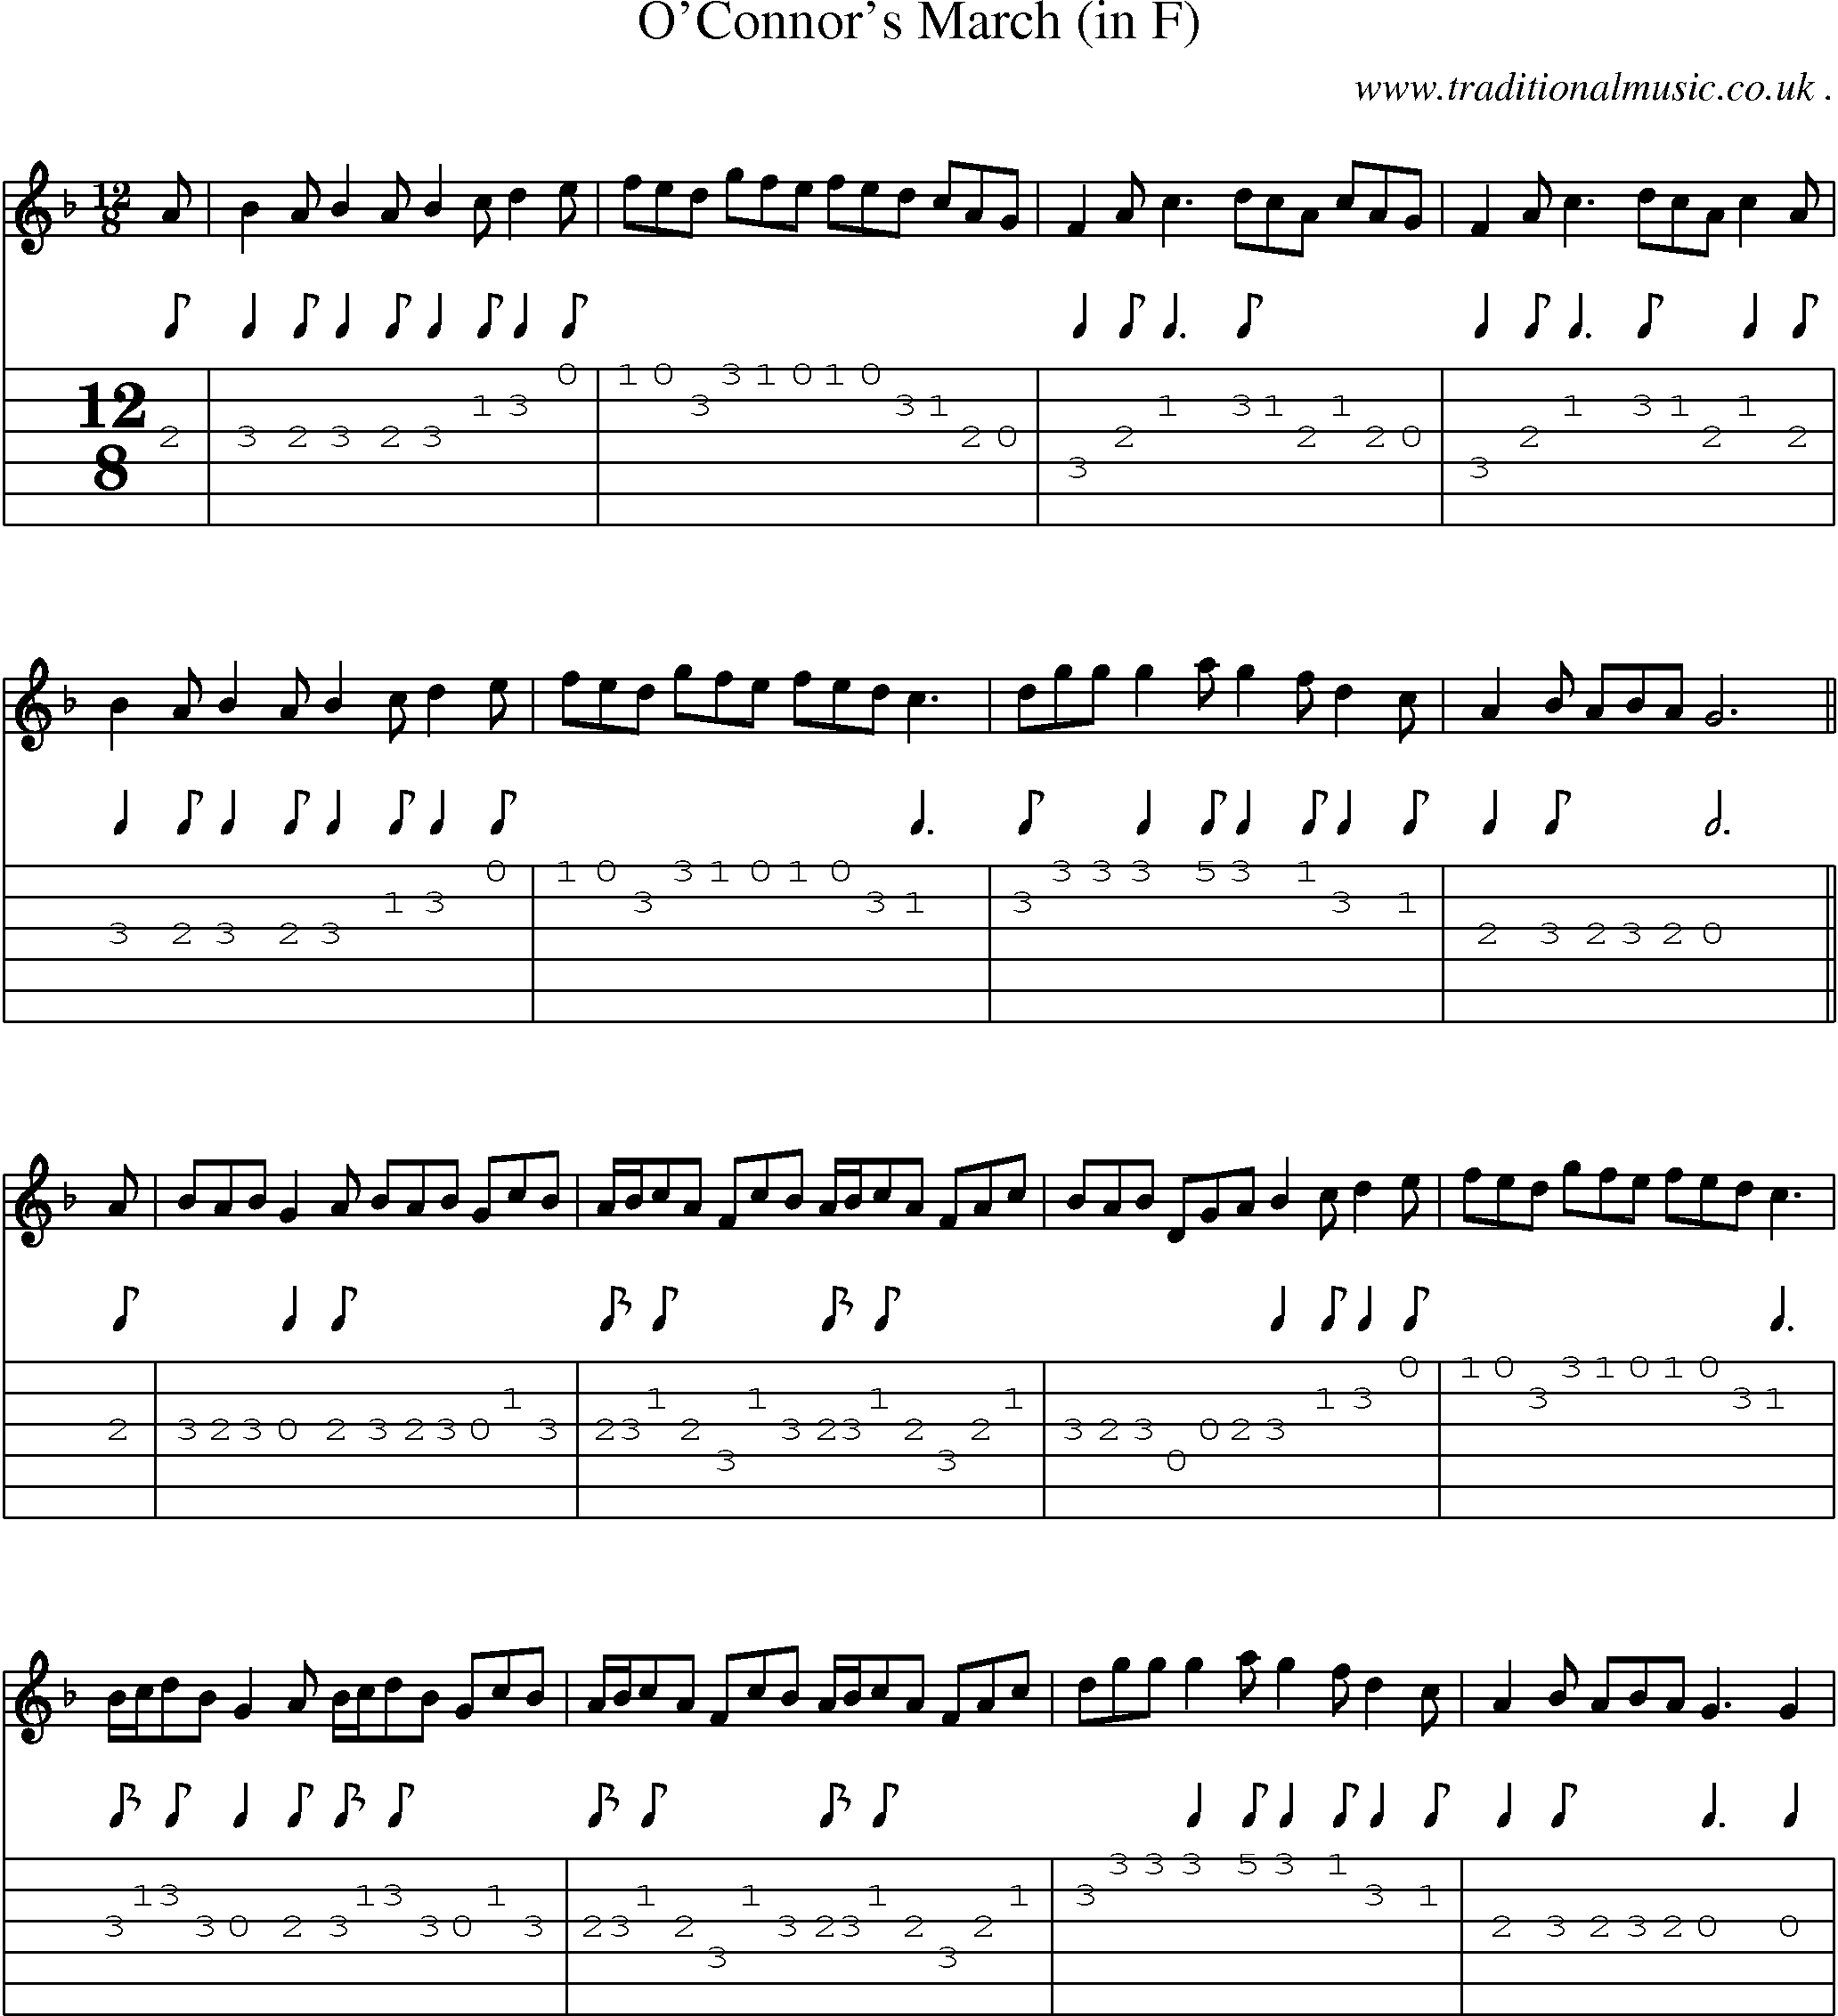 Sheet-Music and Guitar Tabs for Oconnors March (in F)